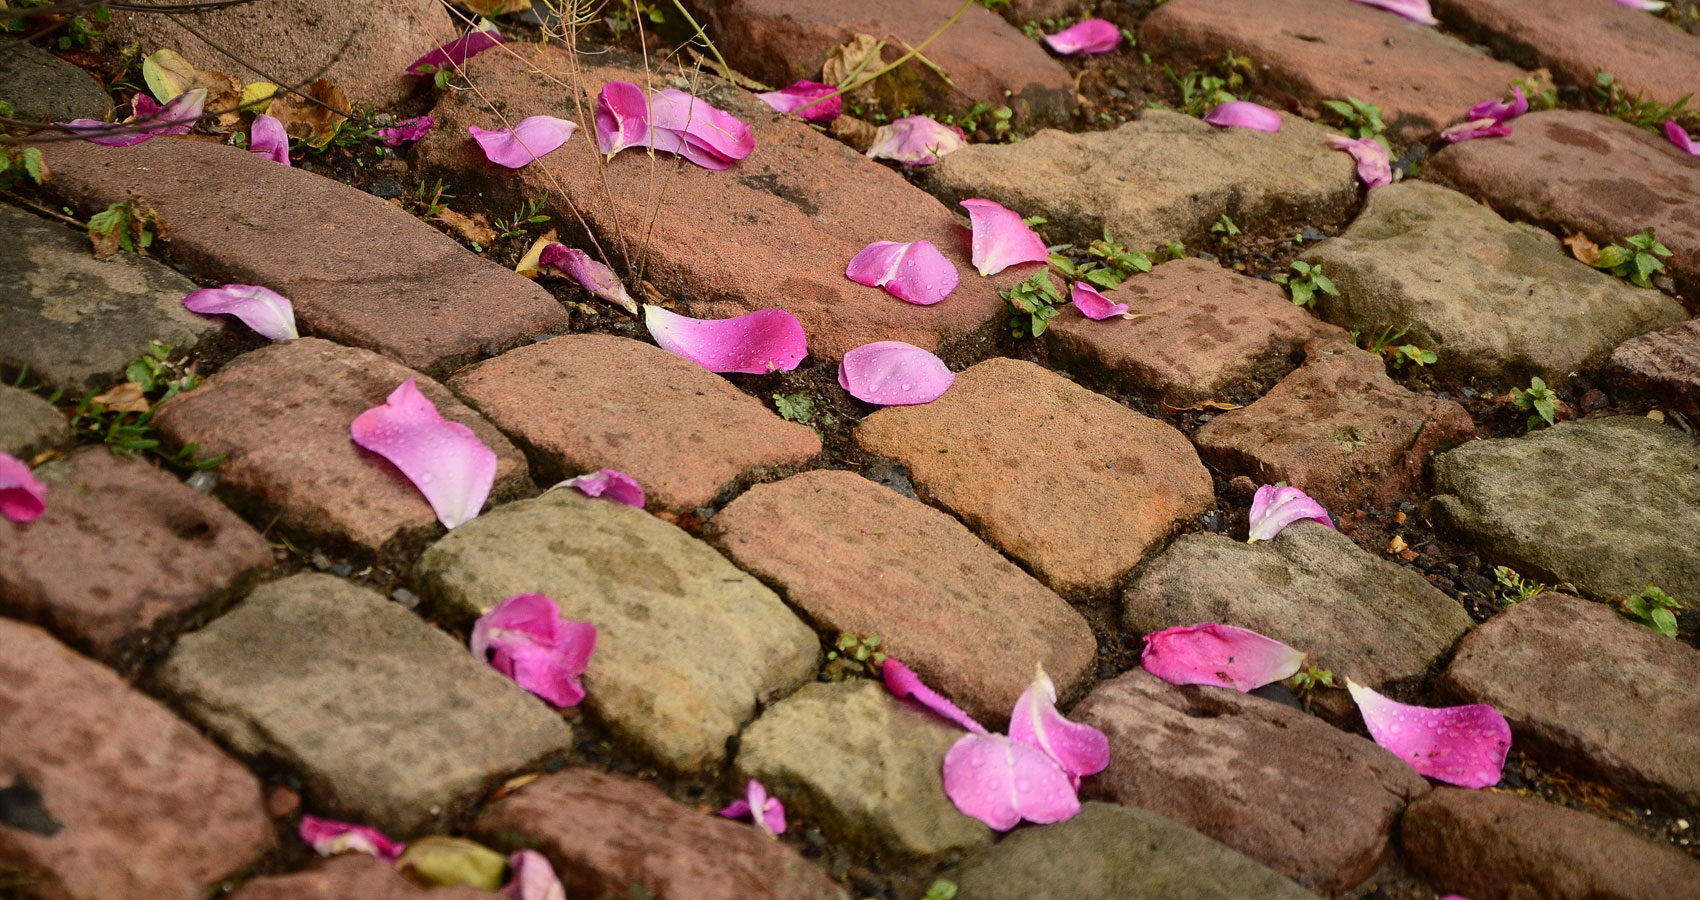 Foot Steps & Rose Petals written by Mario William Vitale at Spillwords.com